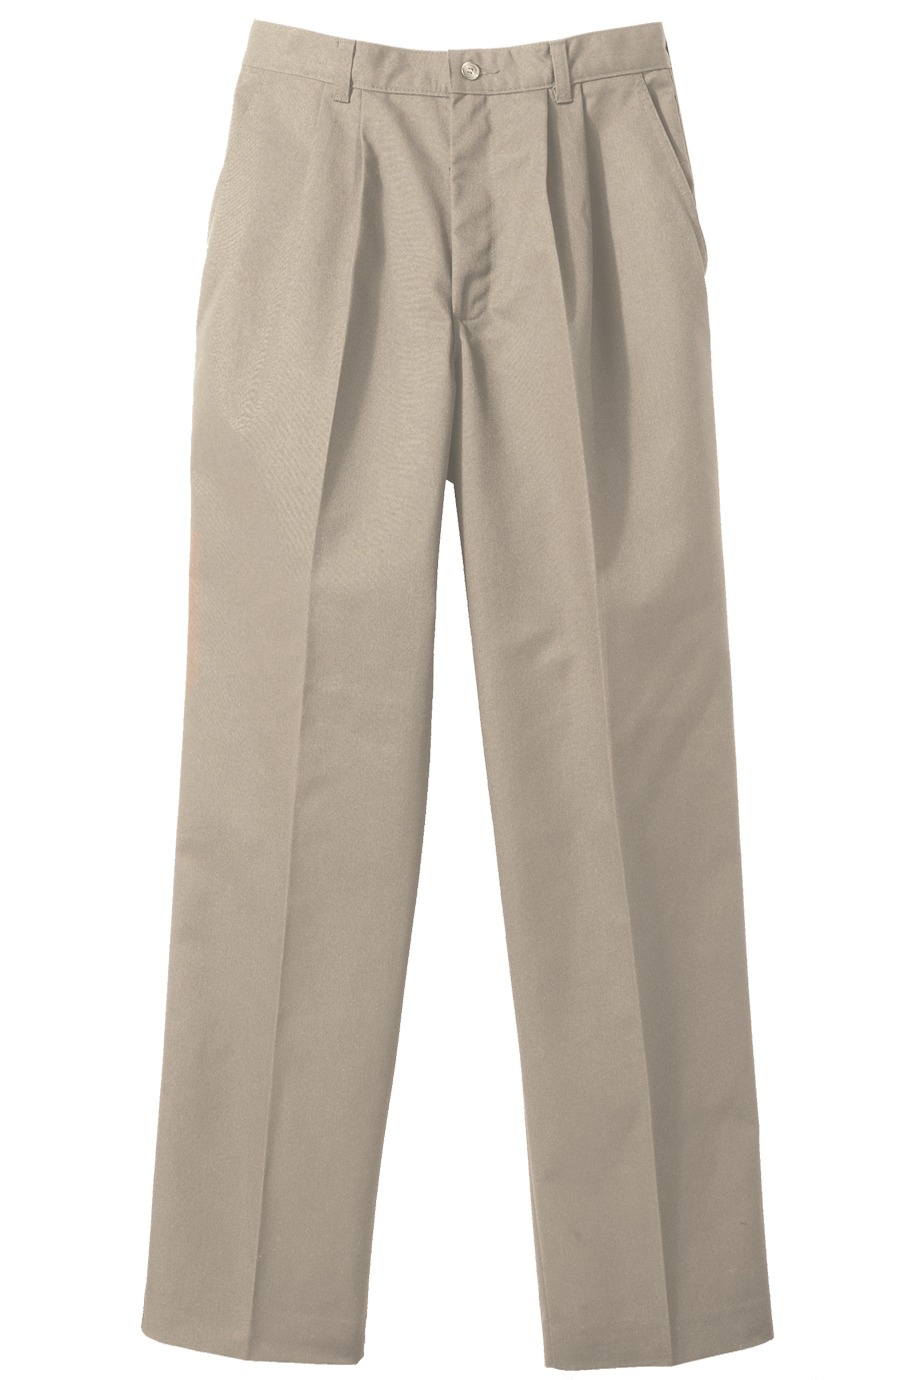 Edwards Garment 8679 - Women's Blended Chino Pleated Pant